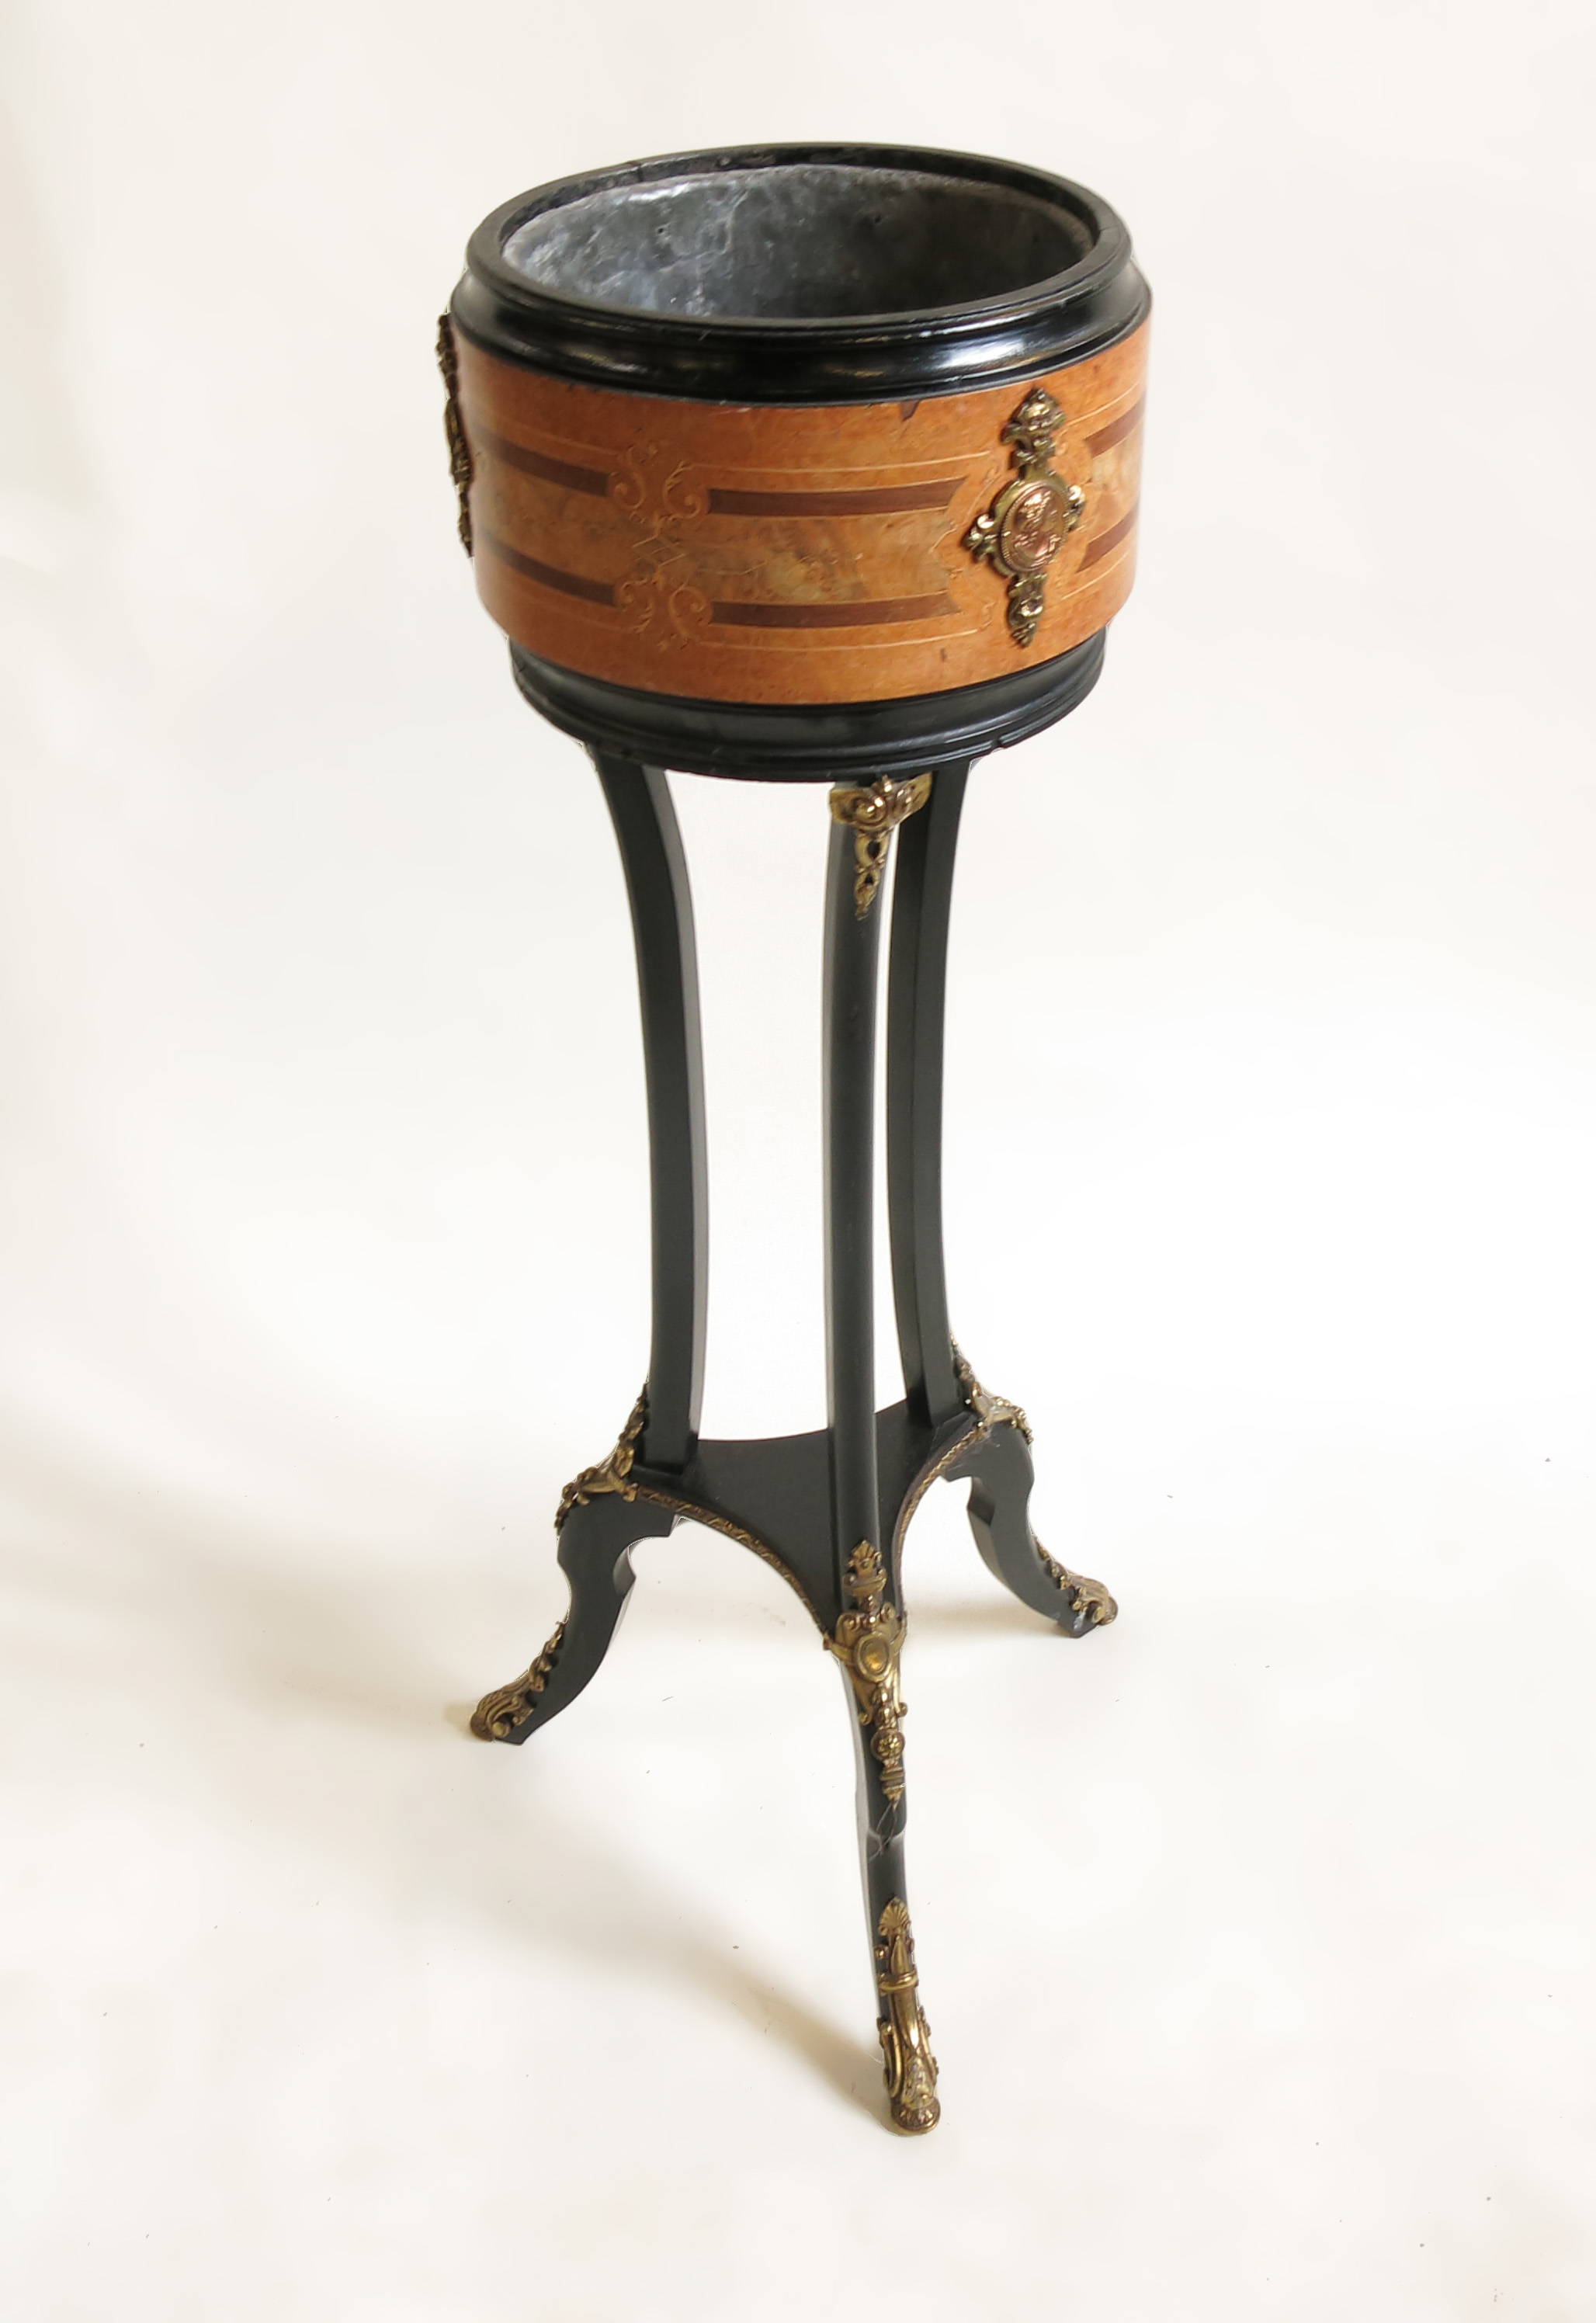 A 19th century circular ebonised jardinere stand, with a band of pollard oak,